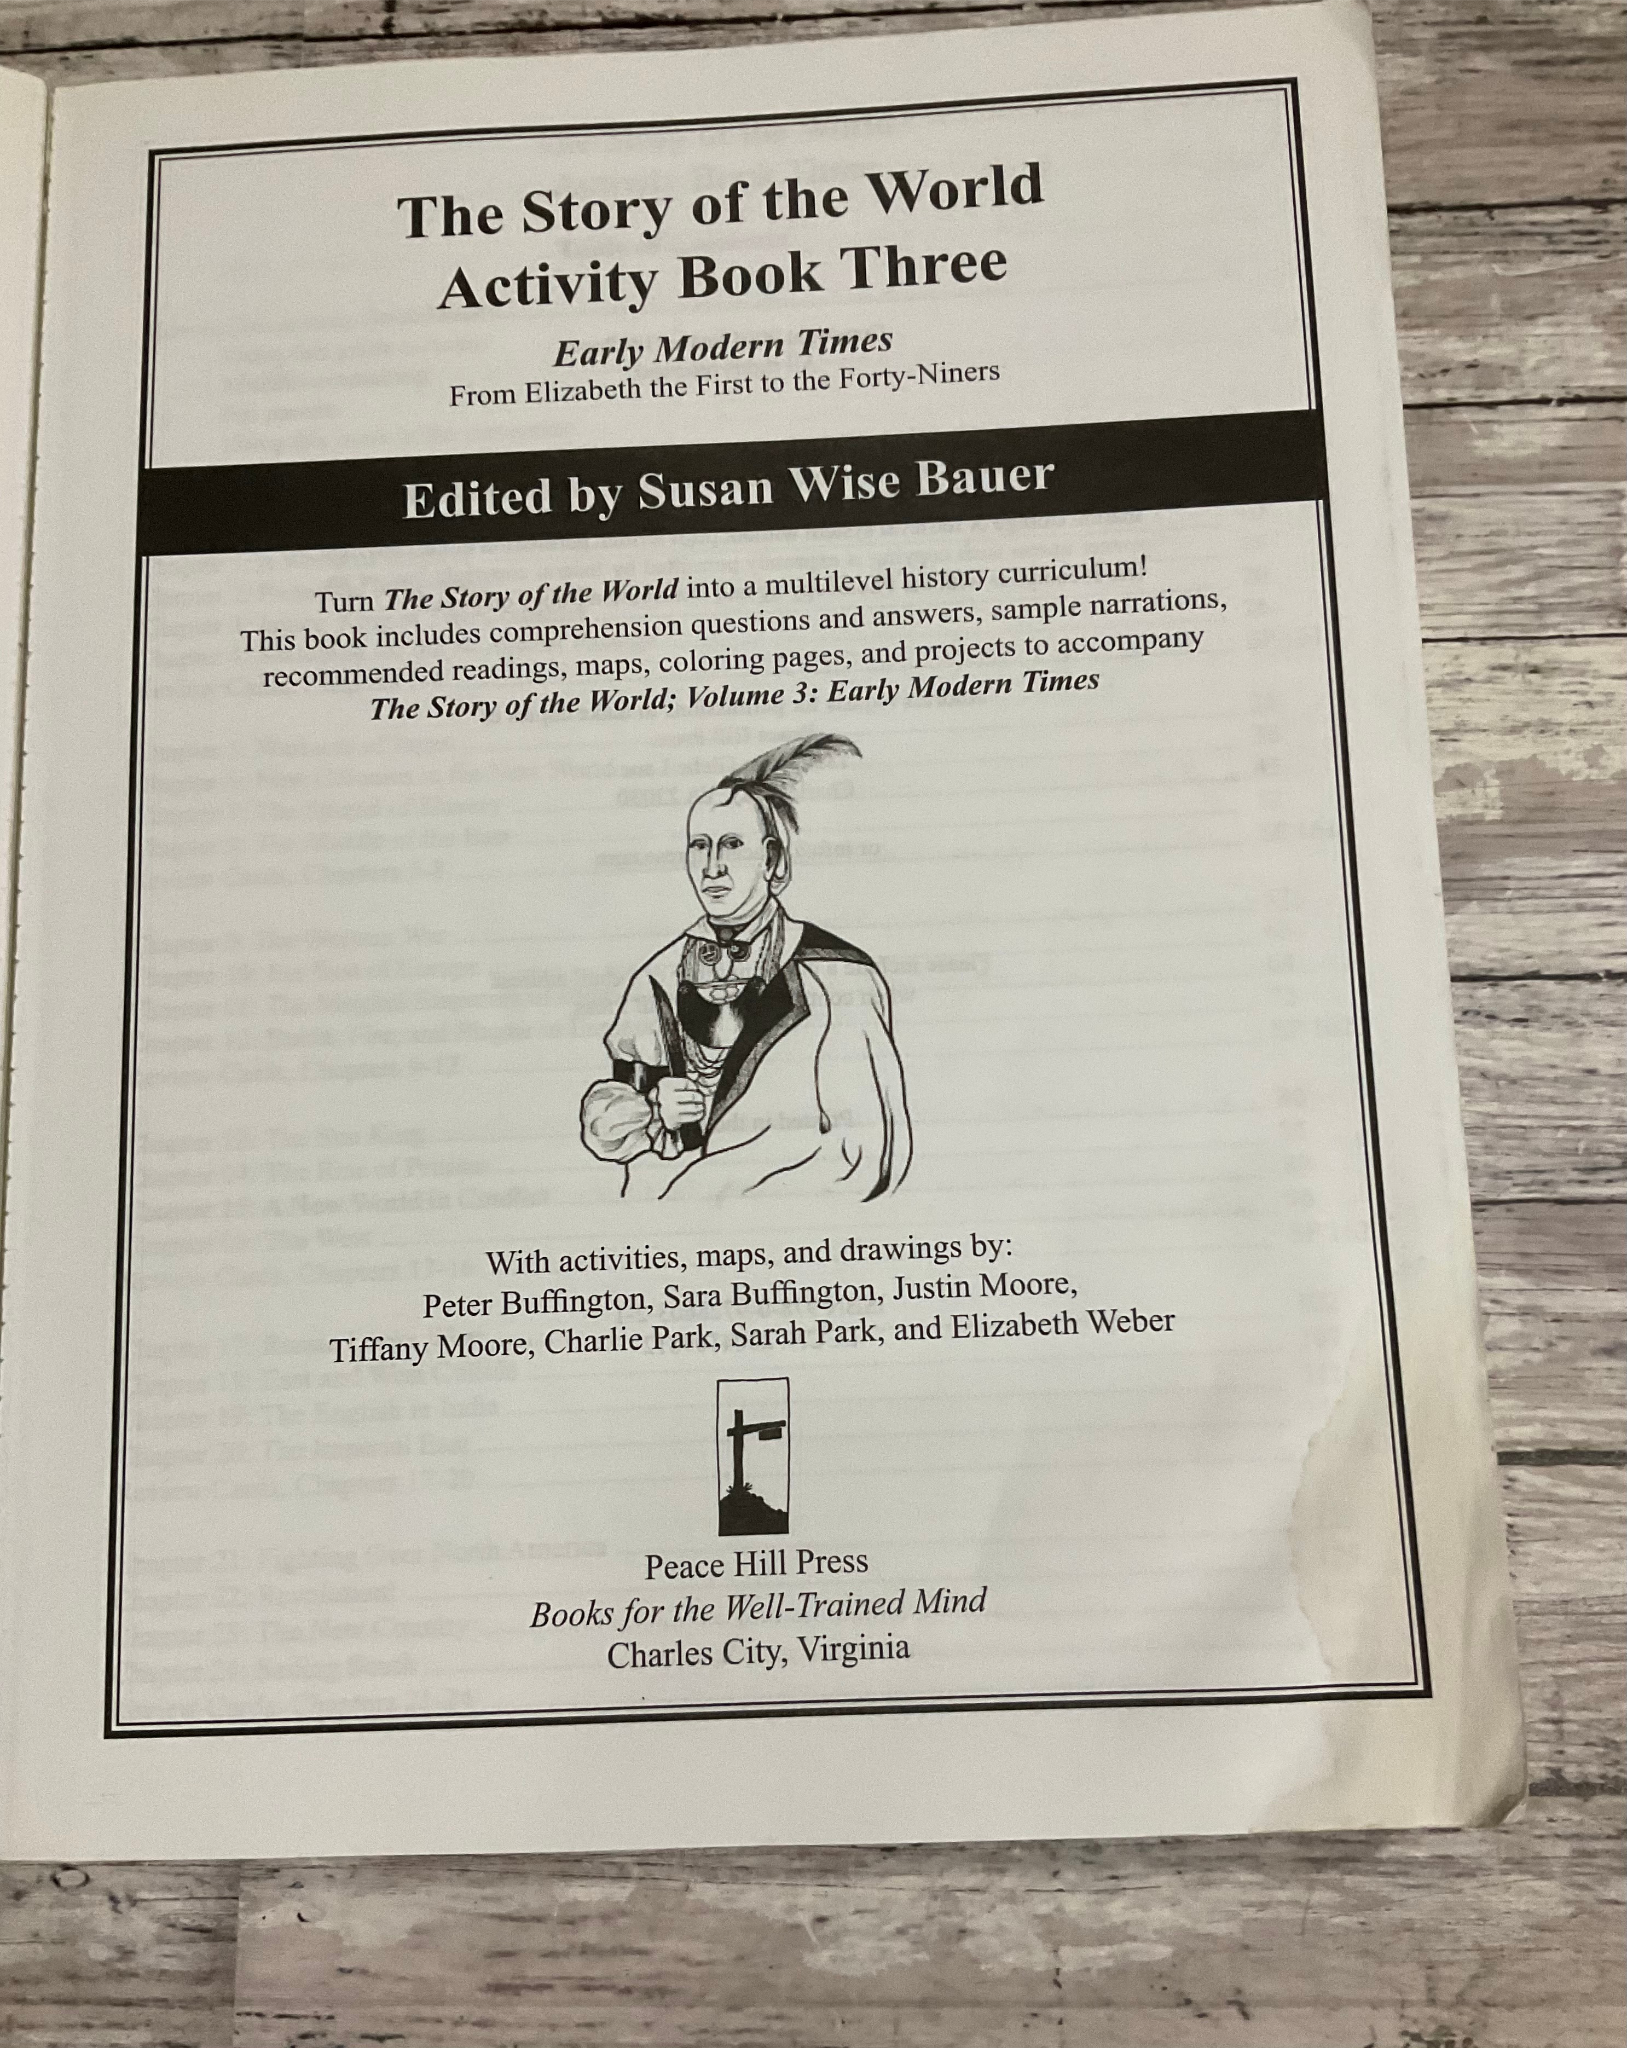 The Story of the World Activity Book Three: Early Modern Times - Anchored Homeschool Resource Center